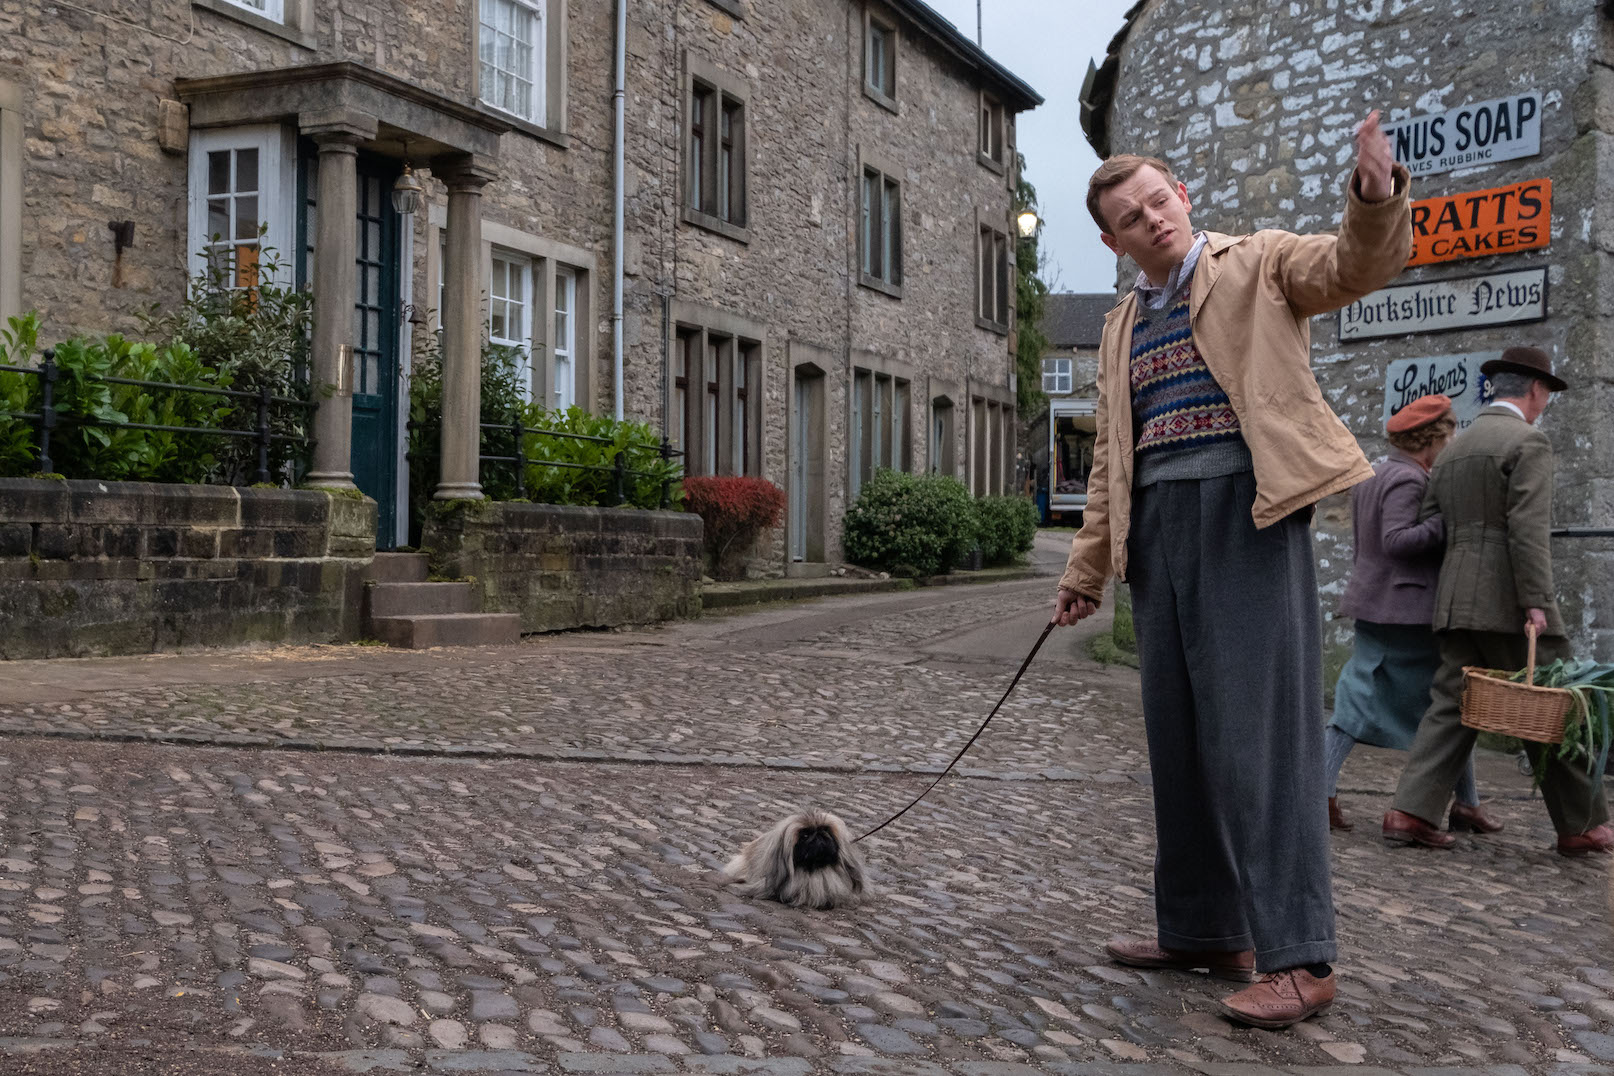 Tristan  (Callum Woodhouse) on his way to the pub with Tricky Woo, who isn't interested in beer or a walk. Credit: Courtesy of © Playground Television UK Ltd & all3media international